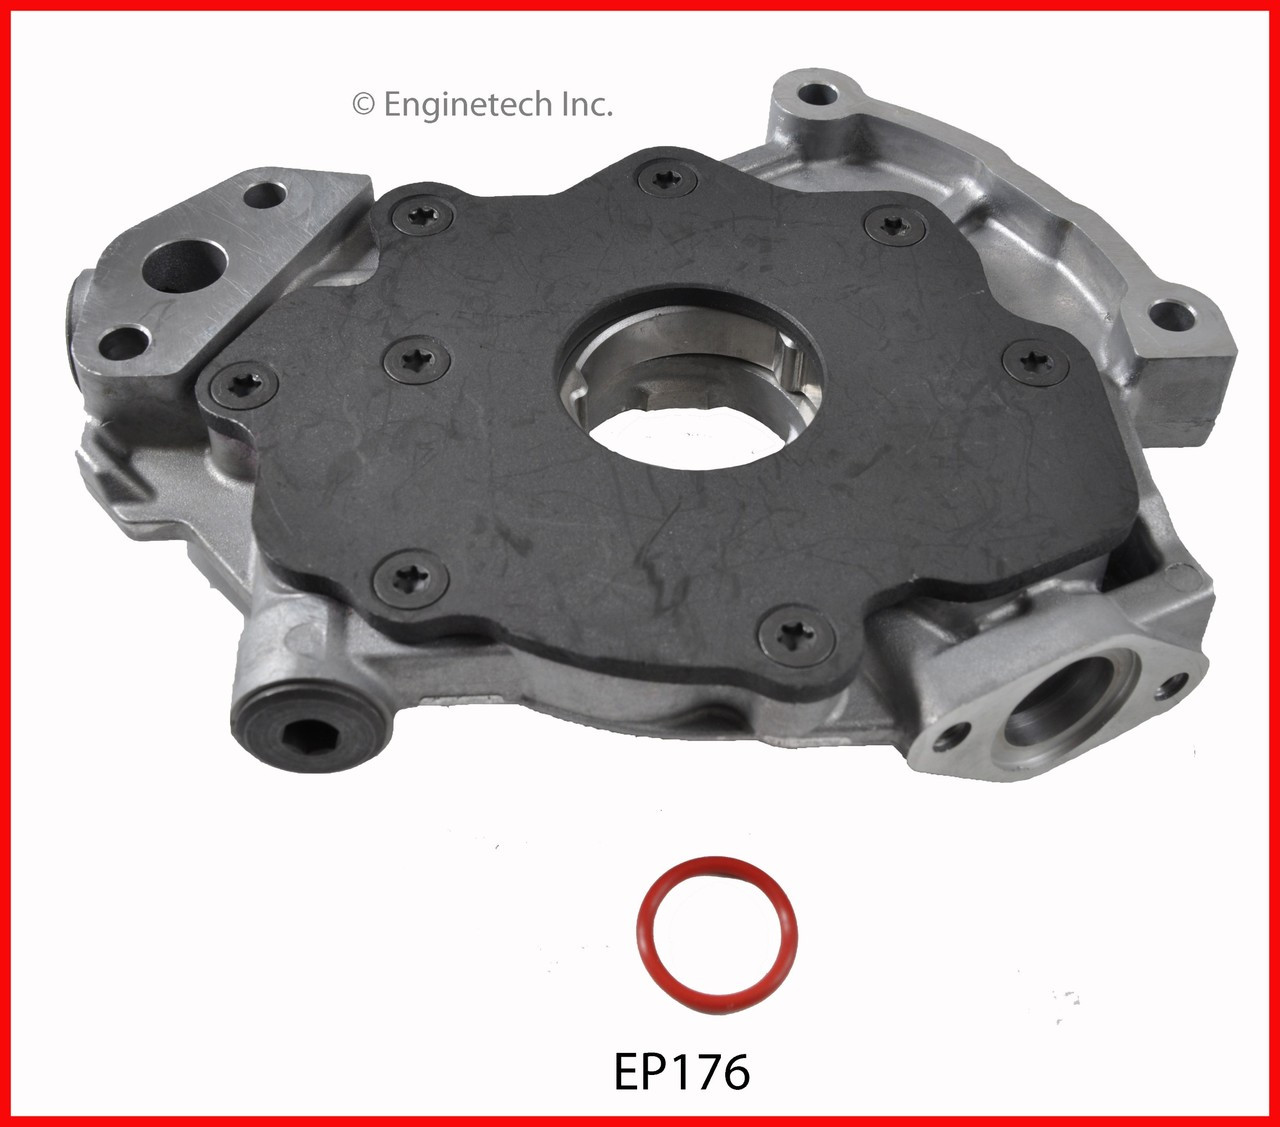 Oil Pump - 2002 Ford Mustang 4.6L (EP176.K180)